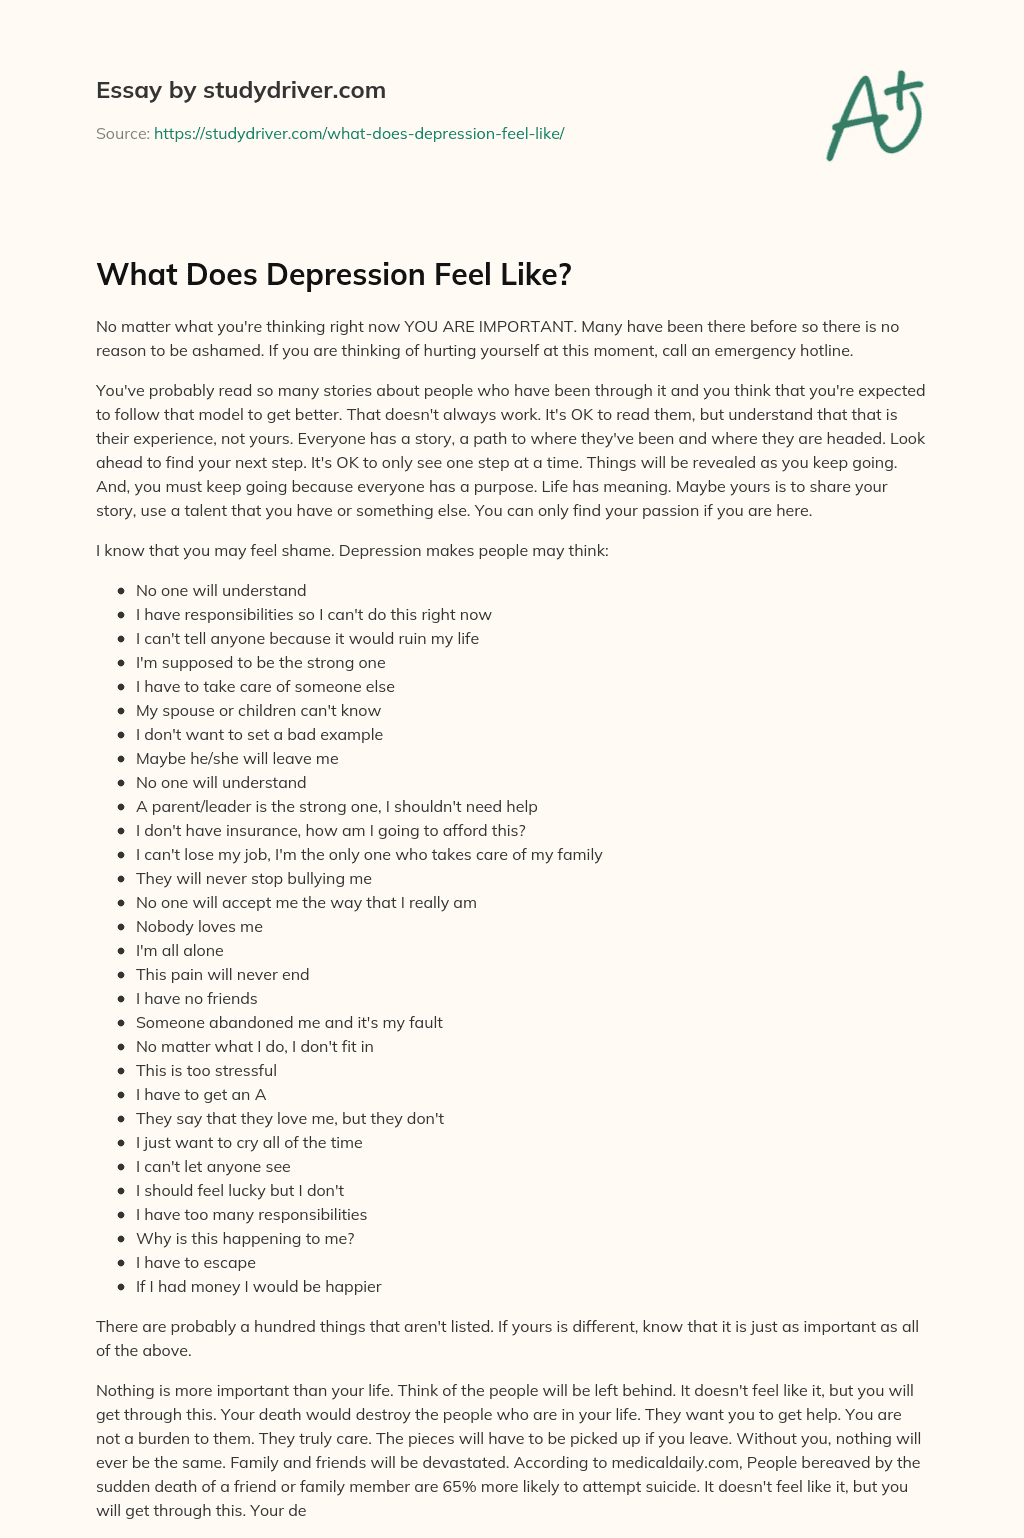 What does Depression Feel Like? essay